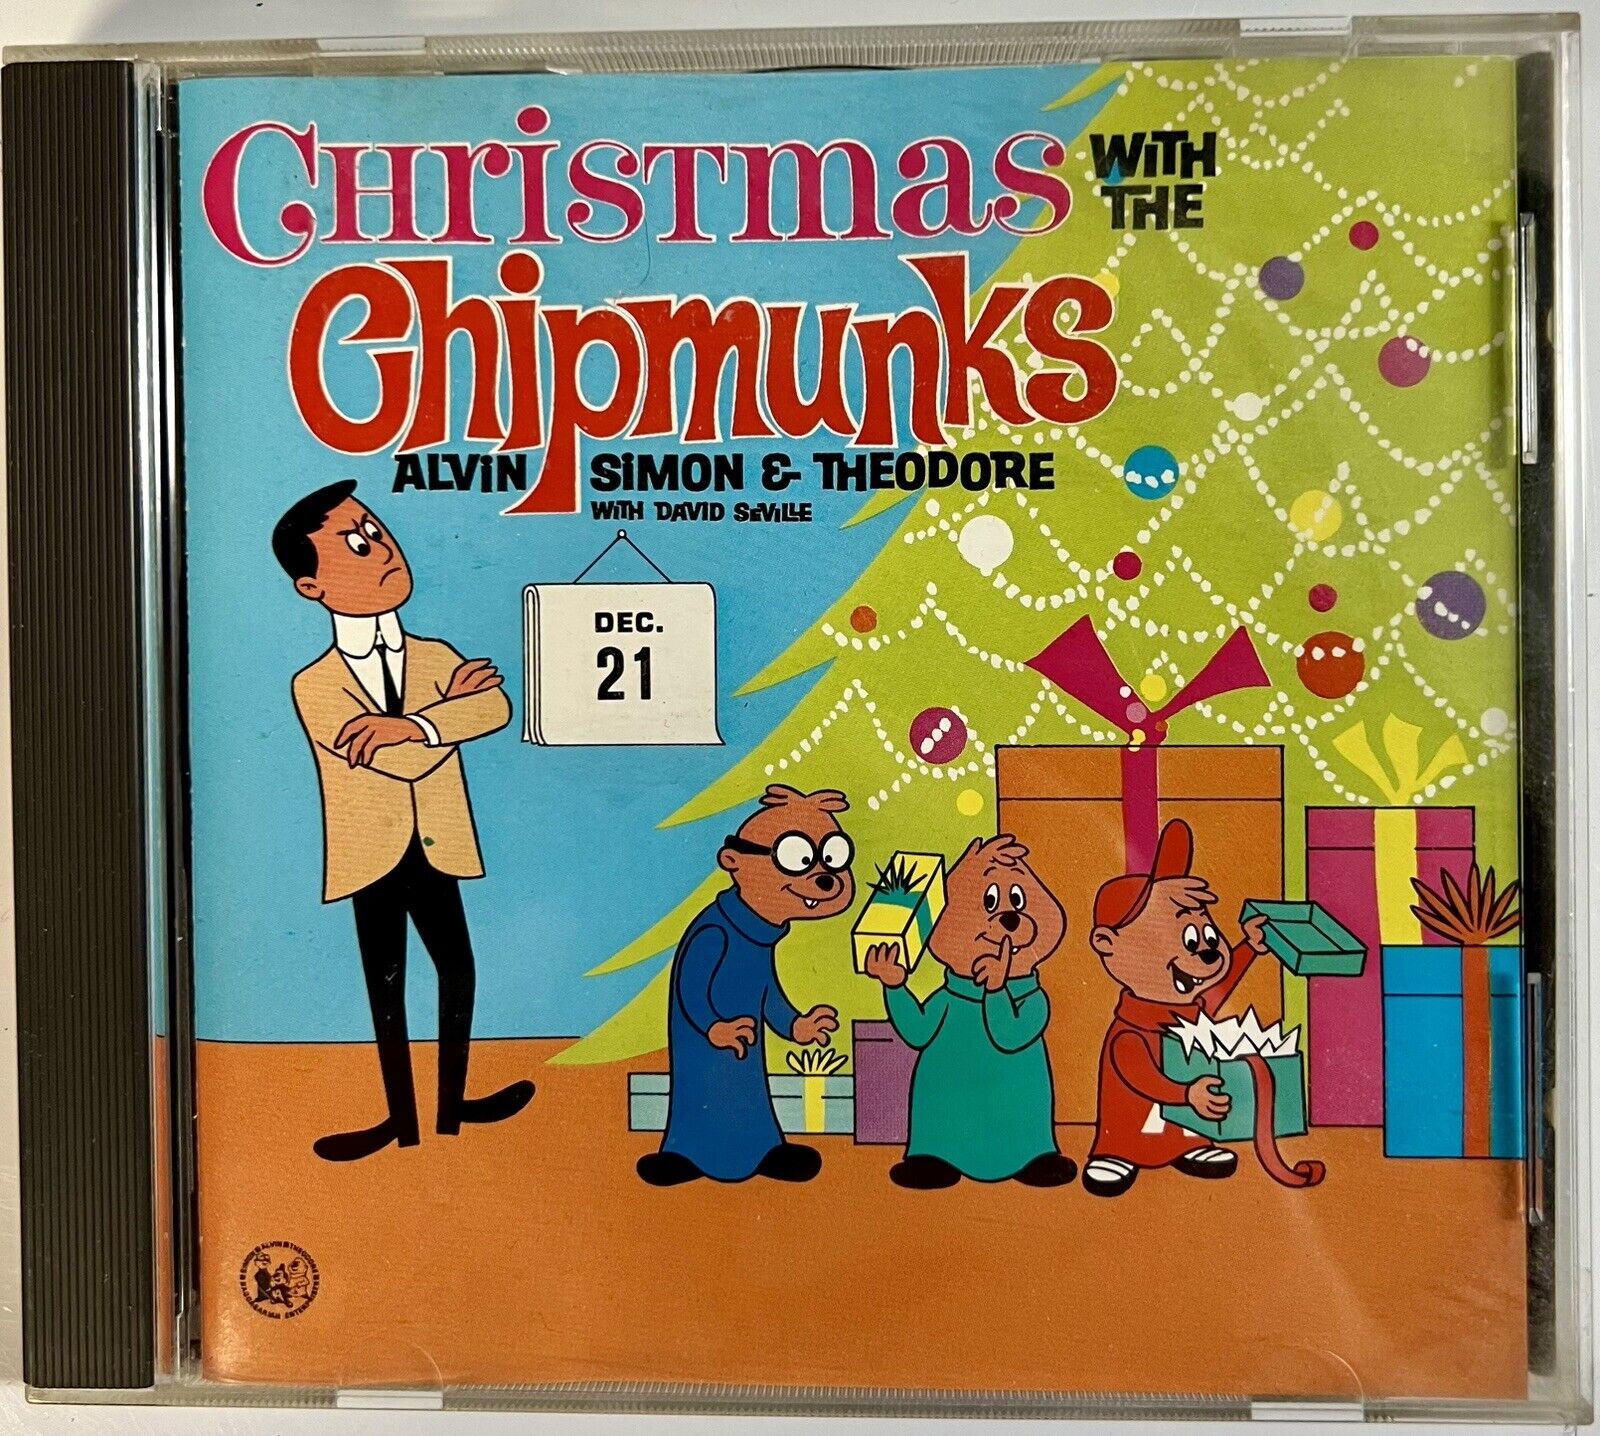 Merry Christmas from the Chipmunks by The Chipmunks (CD, 1980) Mfd. for BMG